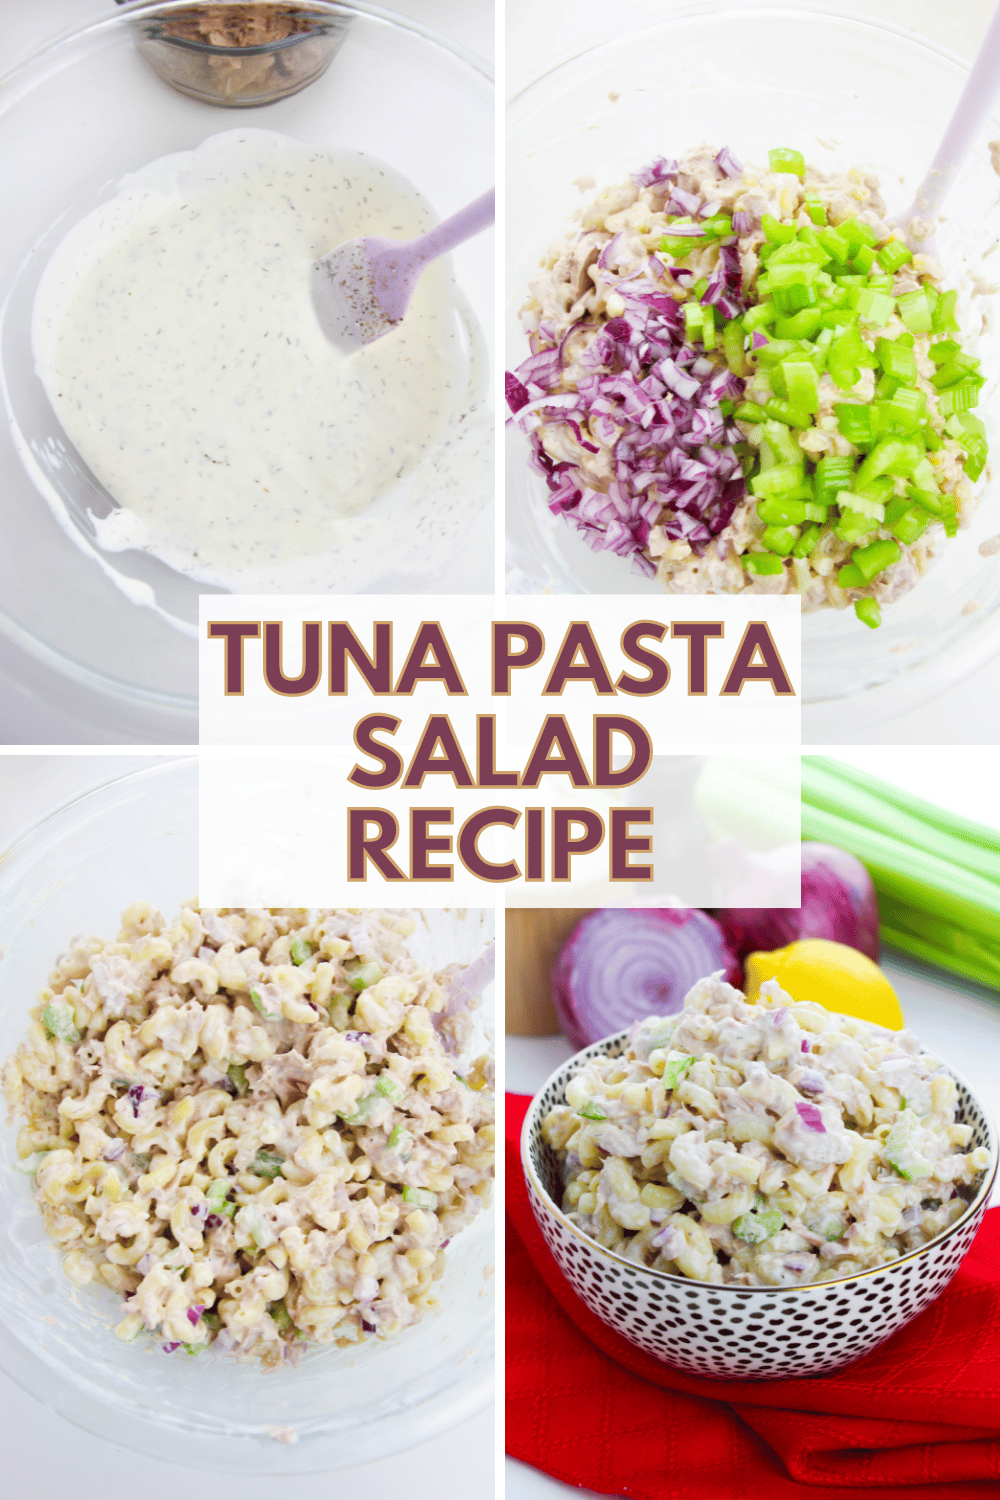 This Tuna Pasta Salad recipe is a creamy, mayo-based pasta salad, loaded with flavor. It’s the perfect potluck dish, or easy lunch for work. #tunapastasaladrecipe #pastasalad #tuna #recipe #salad via @wondermomwannab